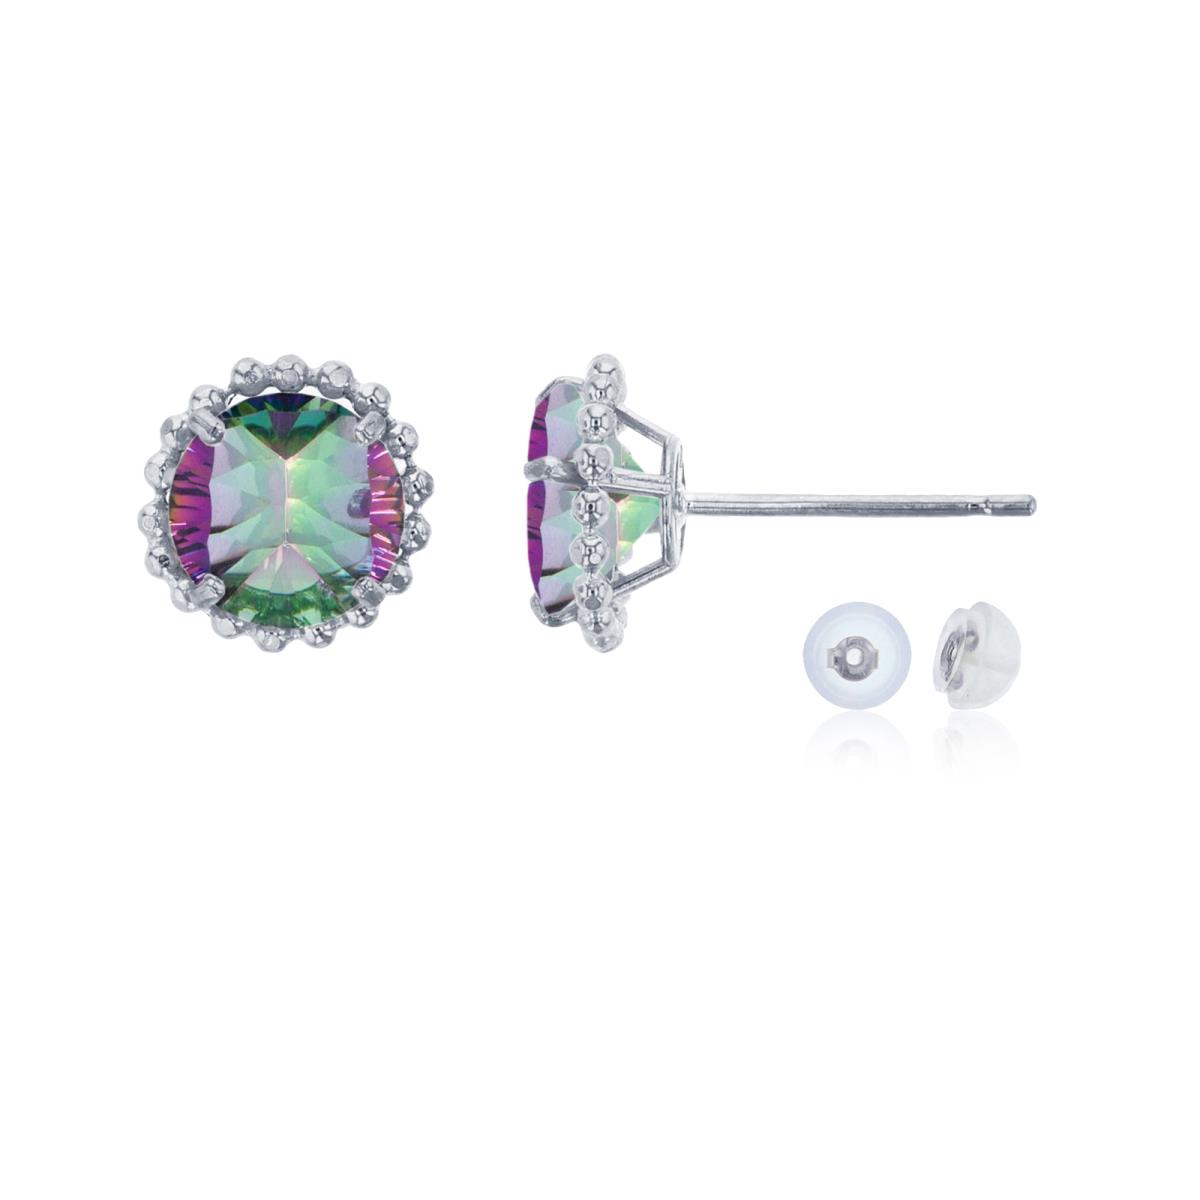 10K White Gold 5mm Rd Mystic Green Quartz with Bead Frame Stud Earring with Silicone Back